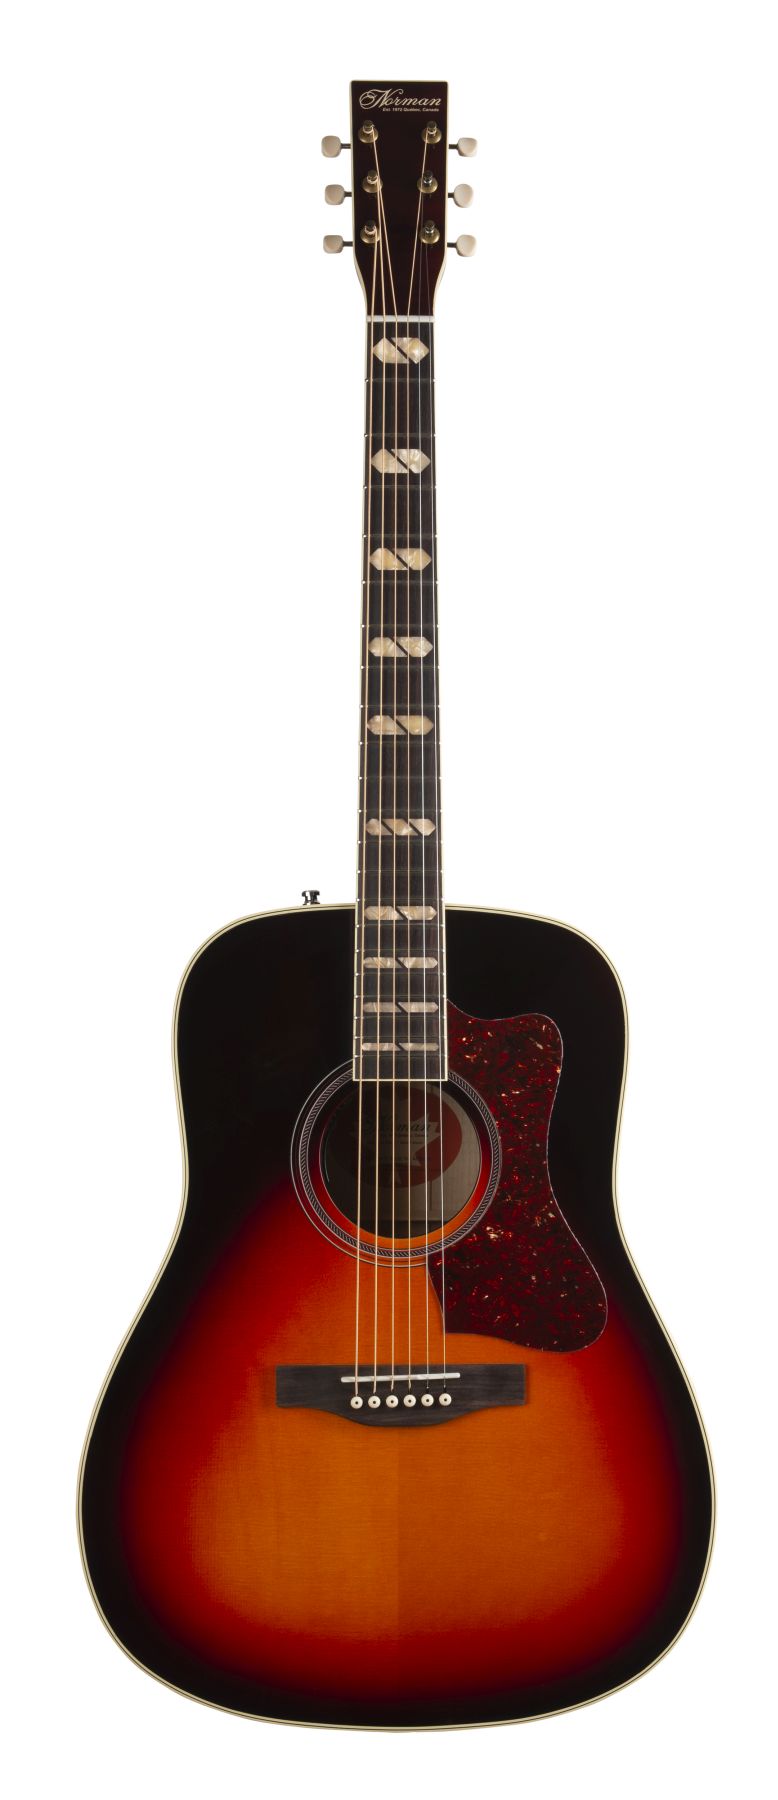 Norman 048526/050512 ST50 Cherry Burst HG Anthem Acoustic Electric avec sac de transport MADE In CANADA